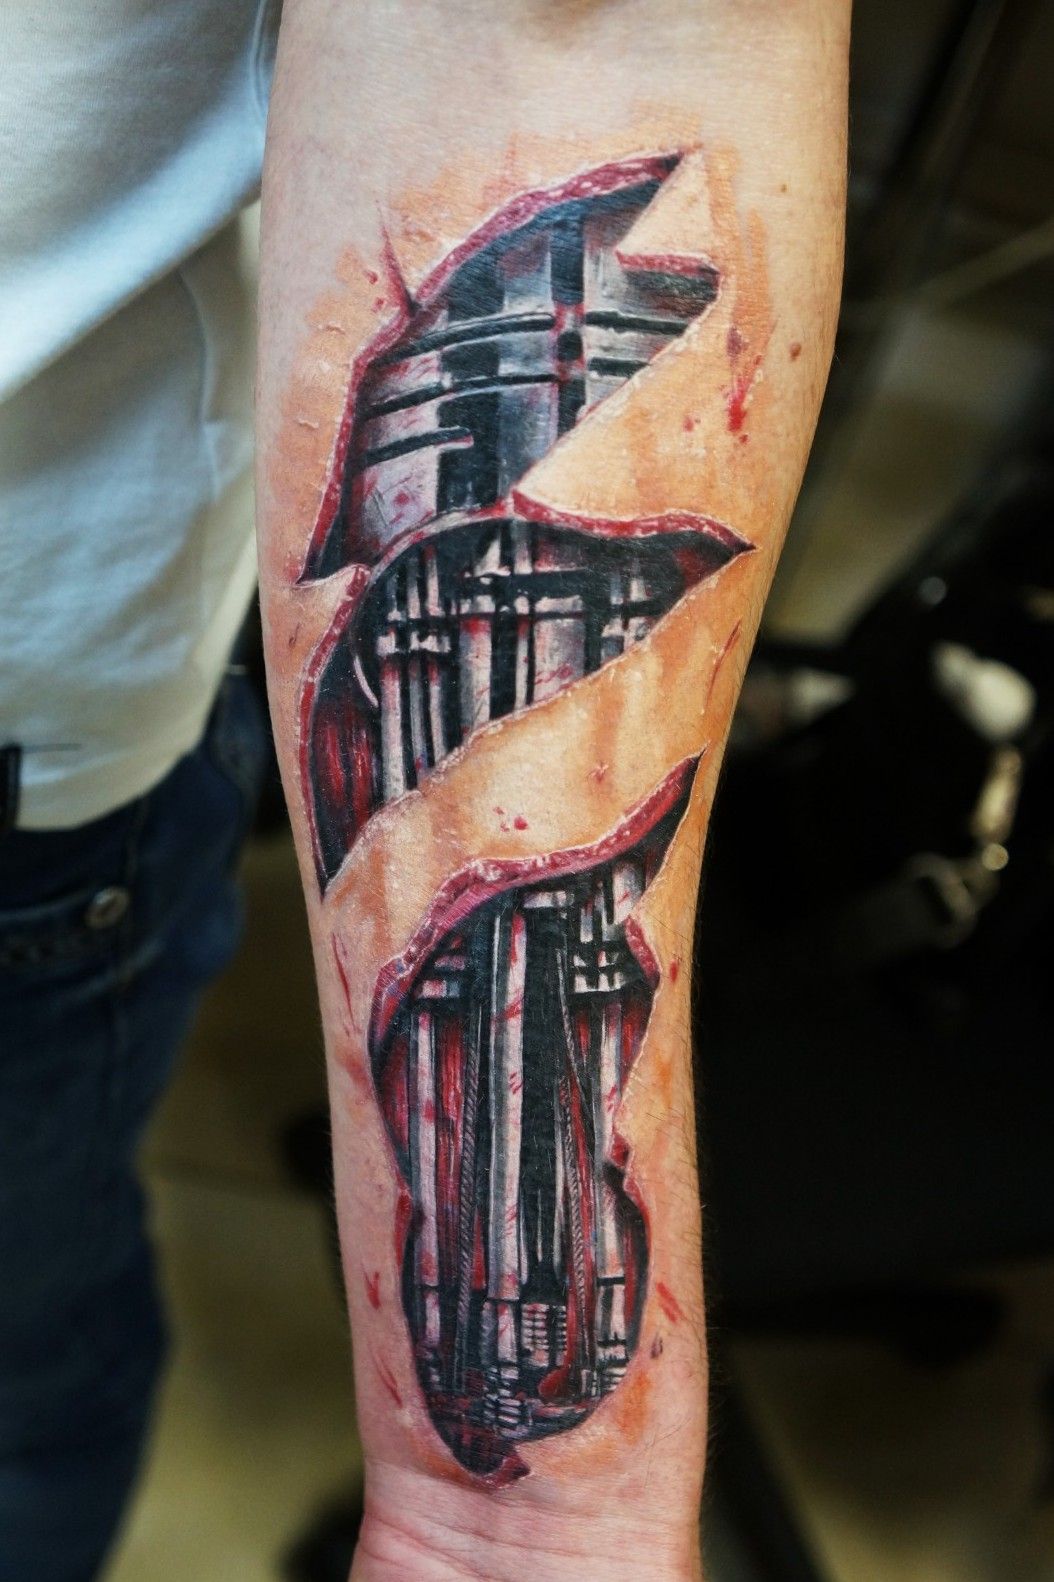 Arm Biomechanical Robot tattoo at theYoucom